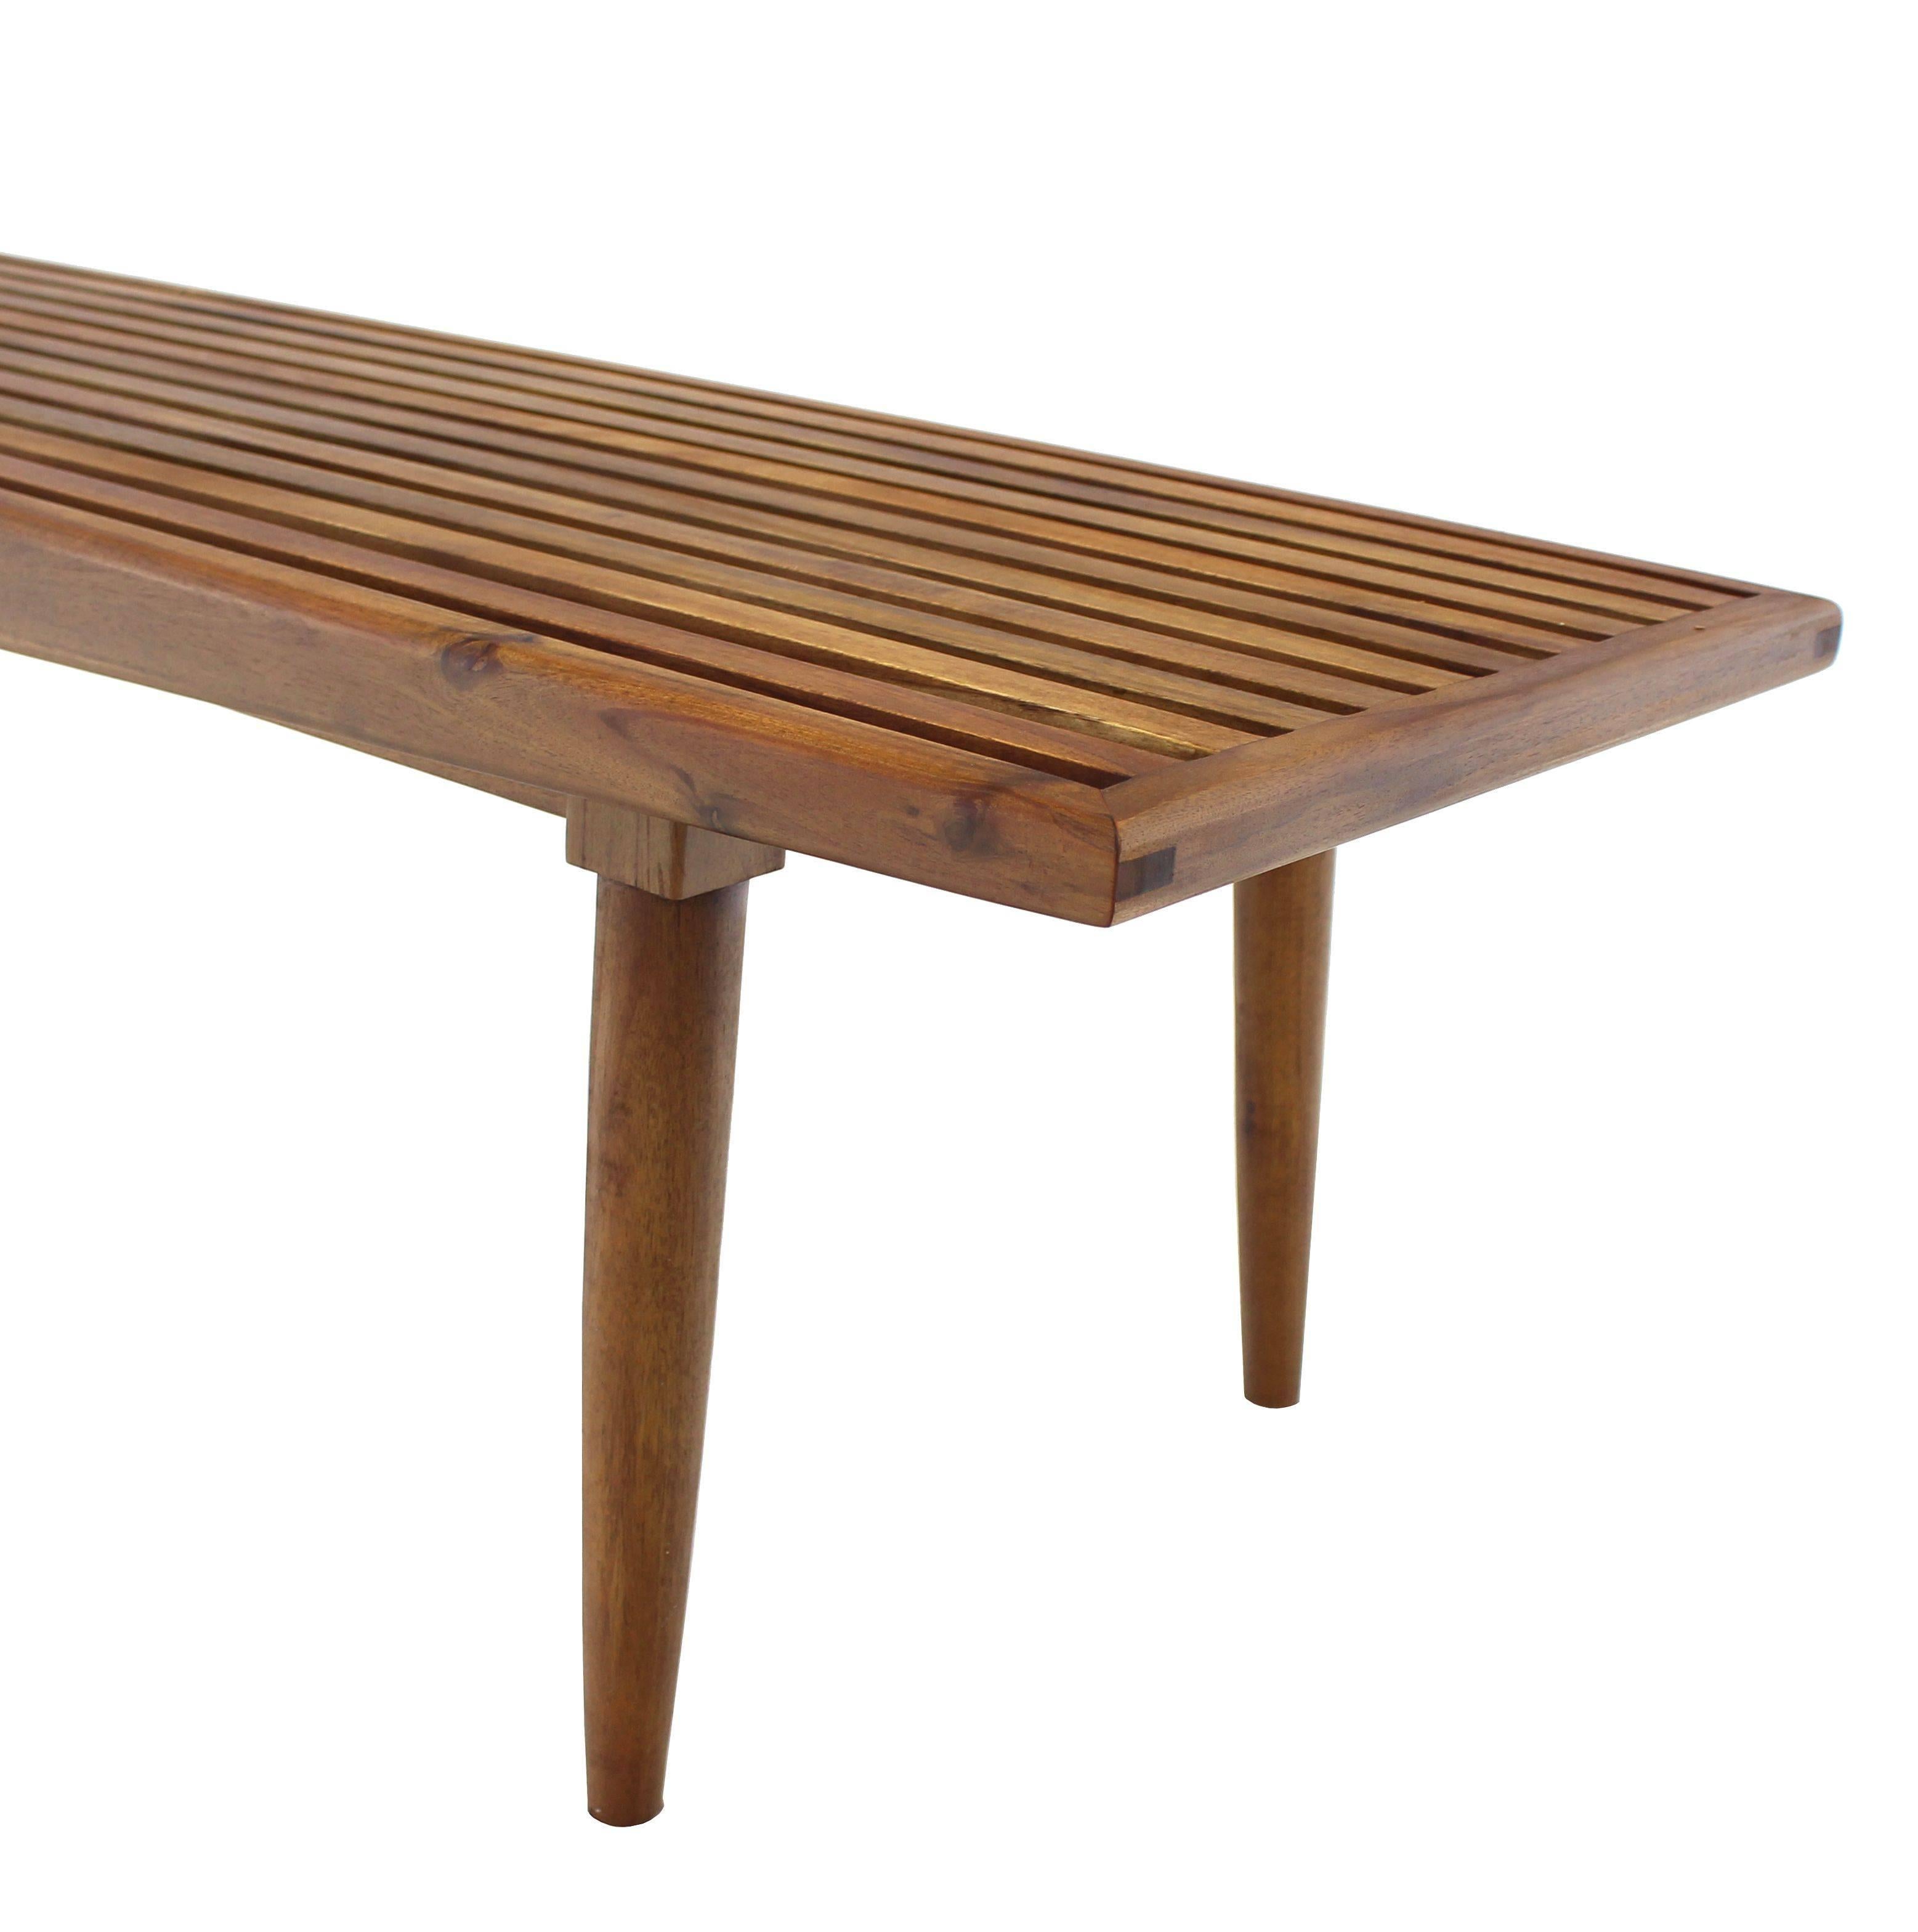 Solid Oiled Slat Wood Bench 2